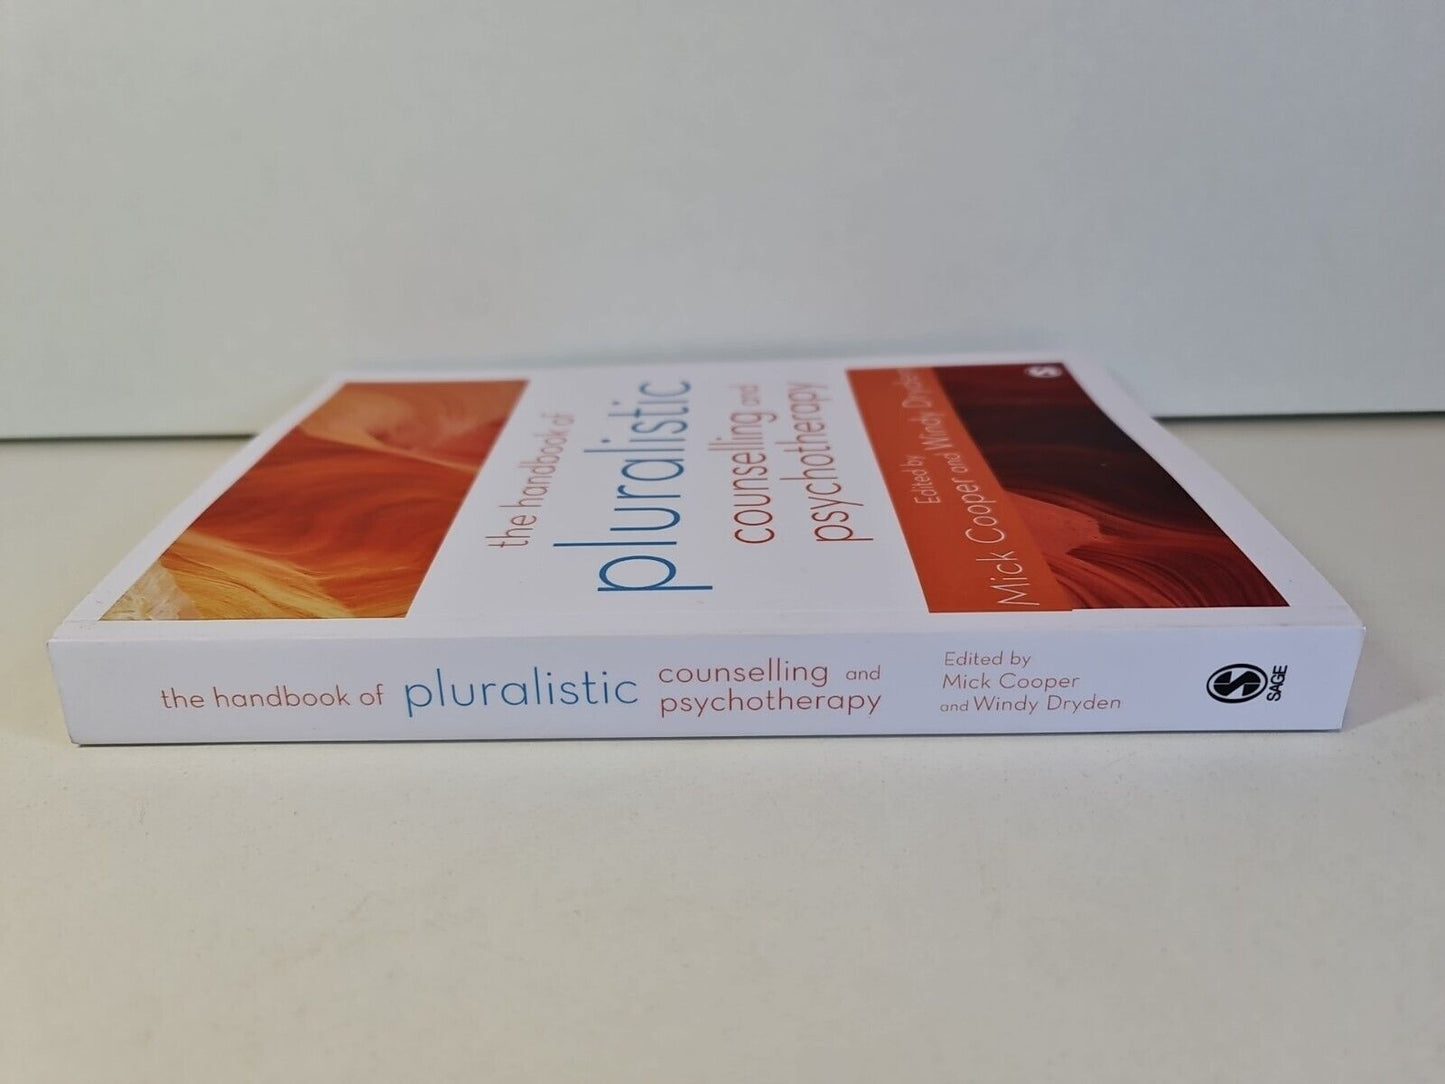 The Handbook of Pluralistic Counselling ... by Windy Dryden (2016)